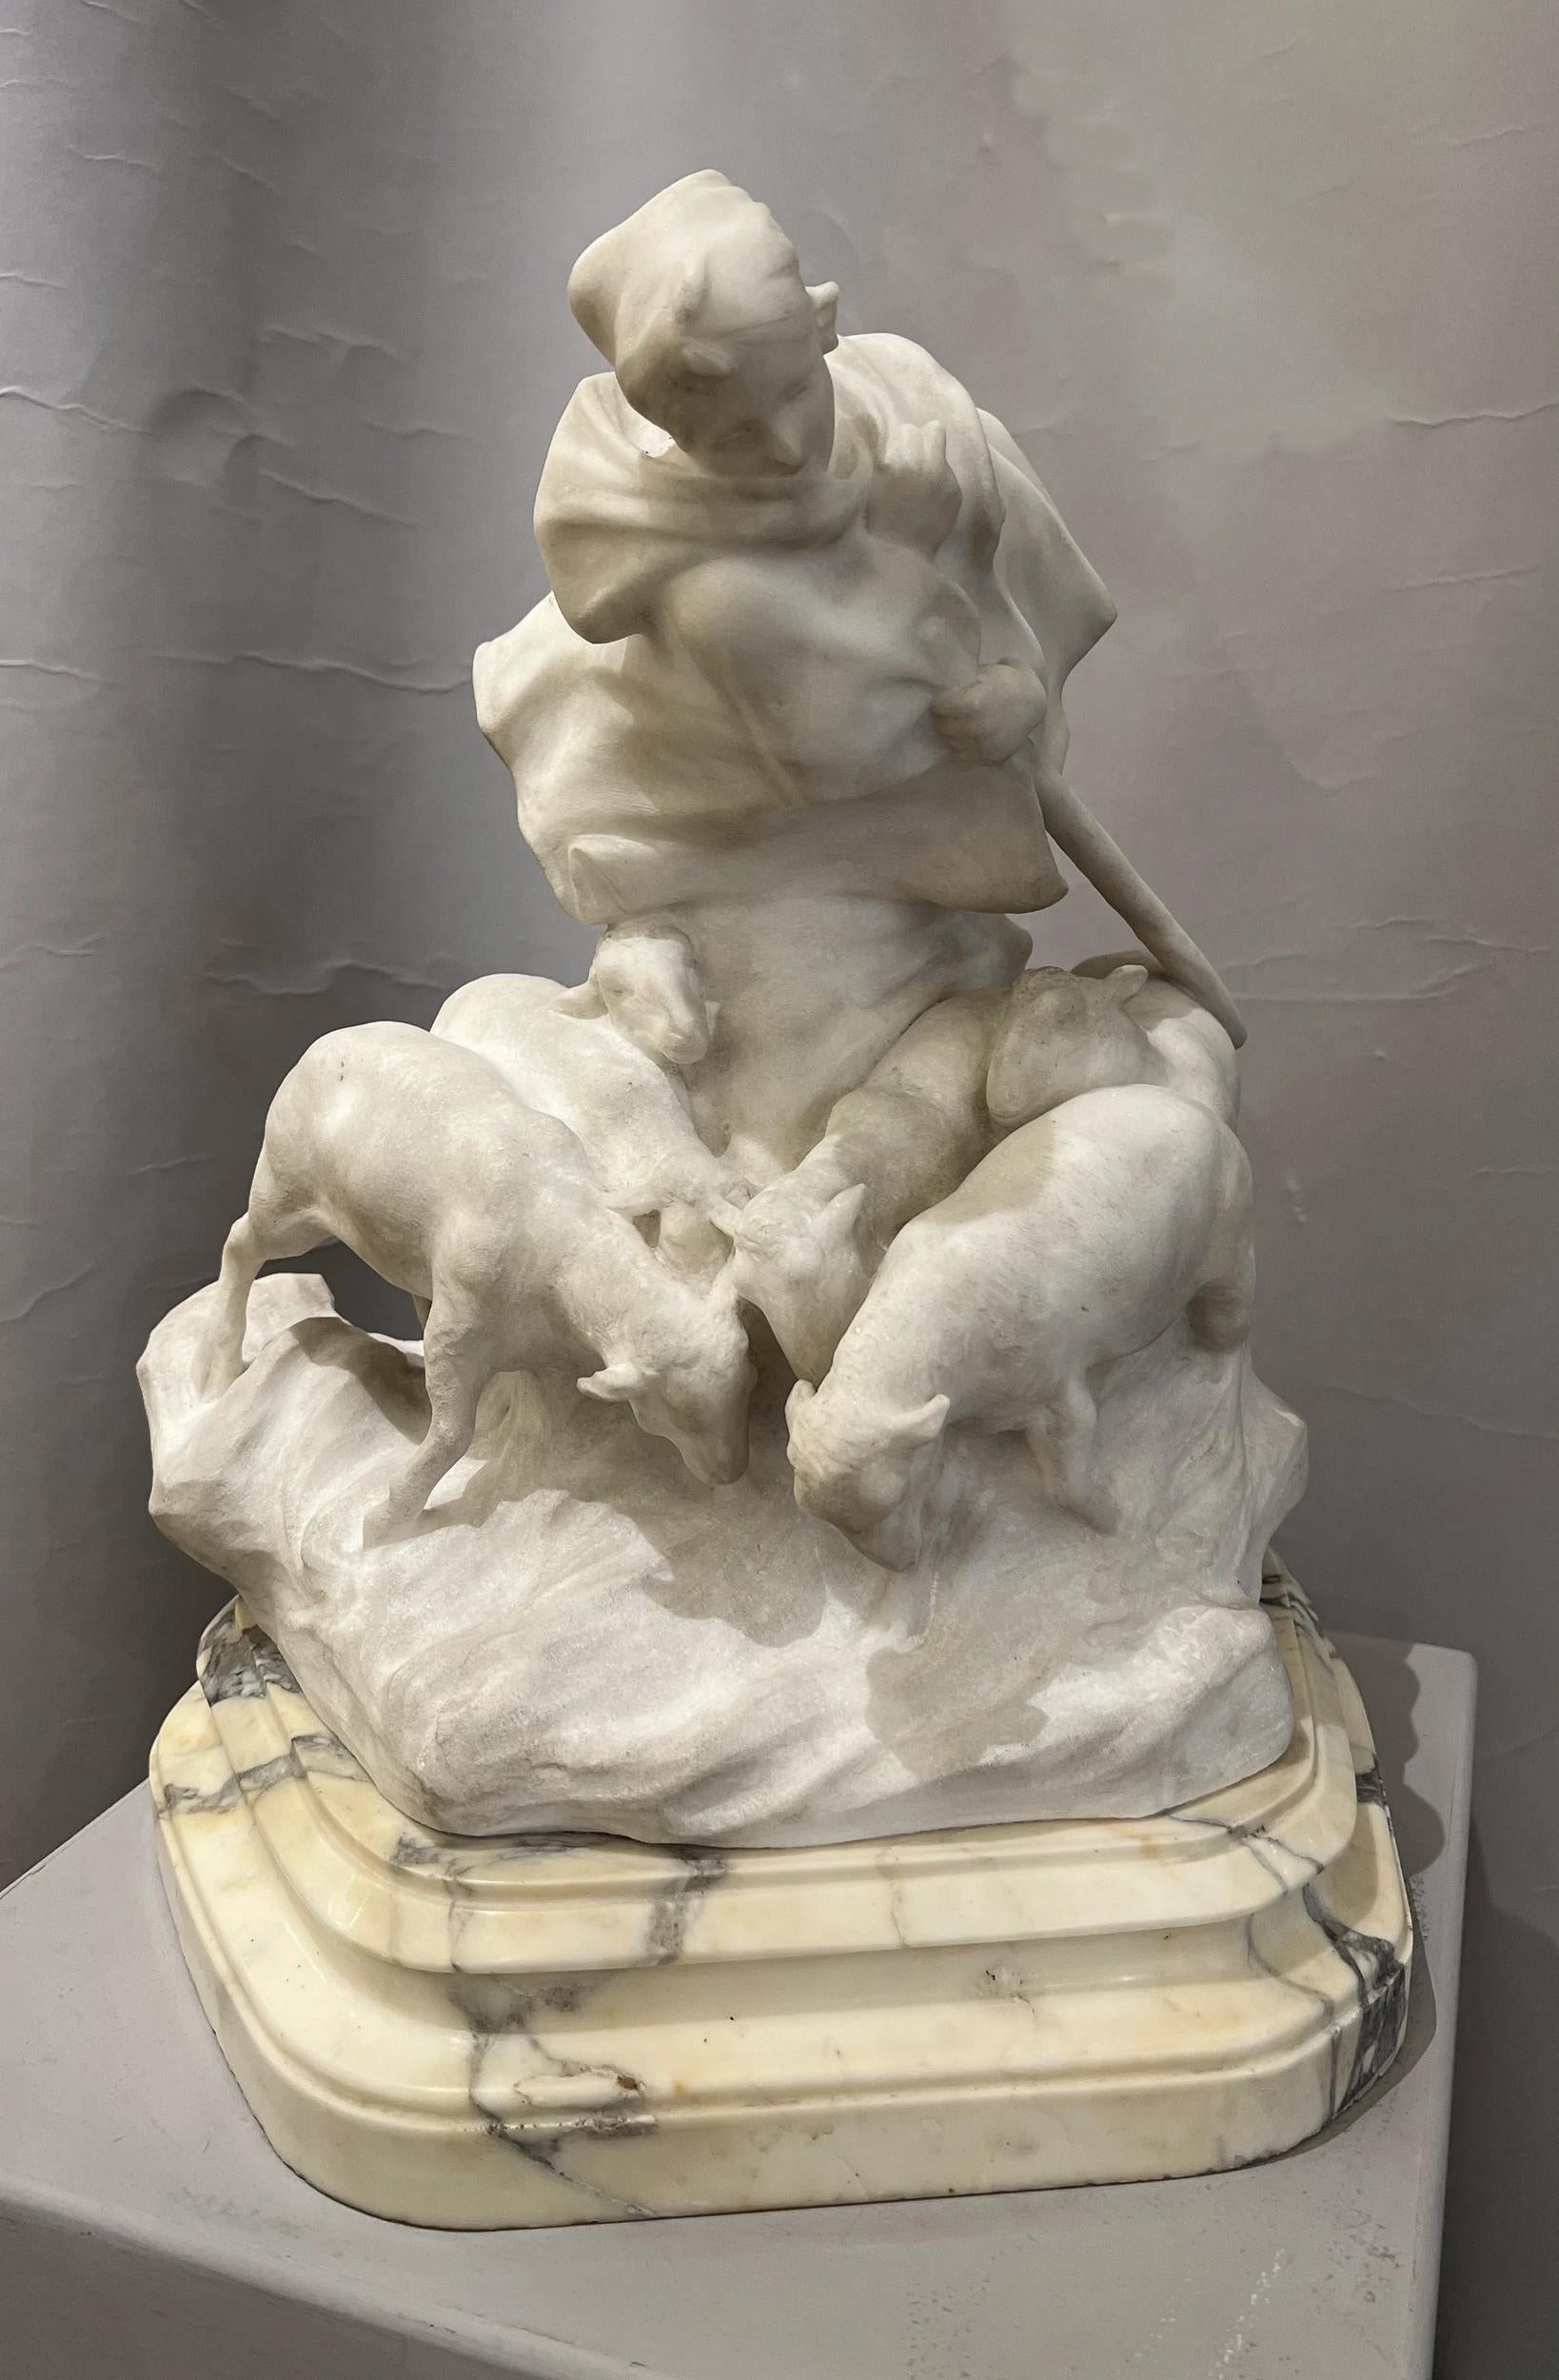 Shepherdess and her sheep », sculpture by Charles Korschann (1872-1943), on a fine scrolled marble base.
Direct carving on alabaster, unique piece.
Charles Korschann ((1872-1943) was a Czech sculptor. He worked in the Czech Republic, Germany and